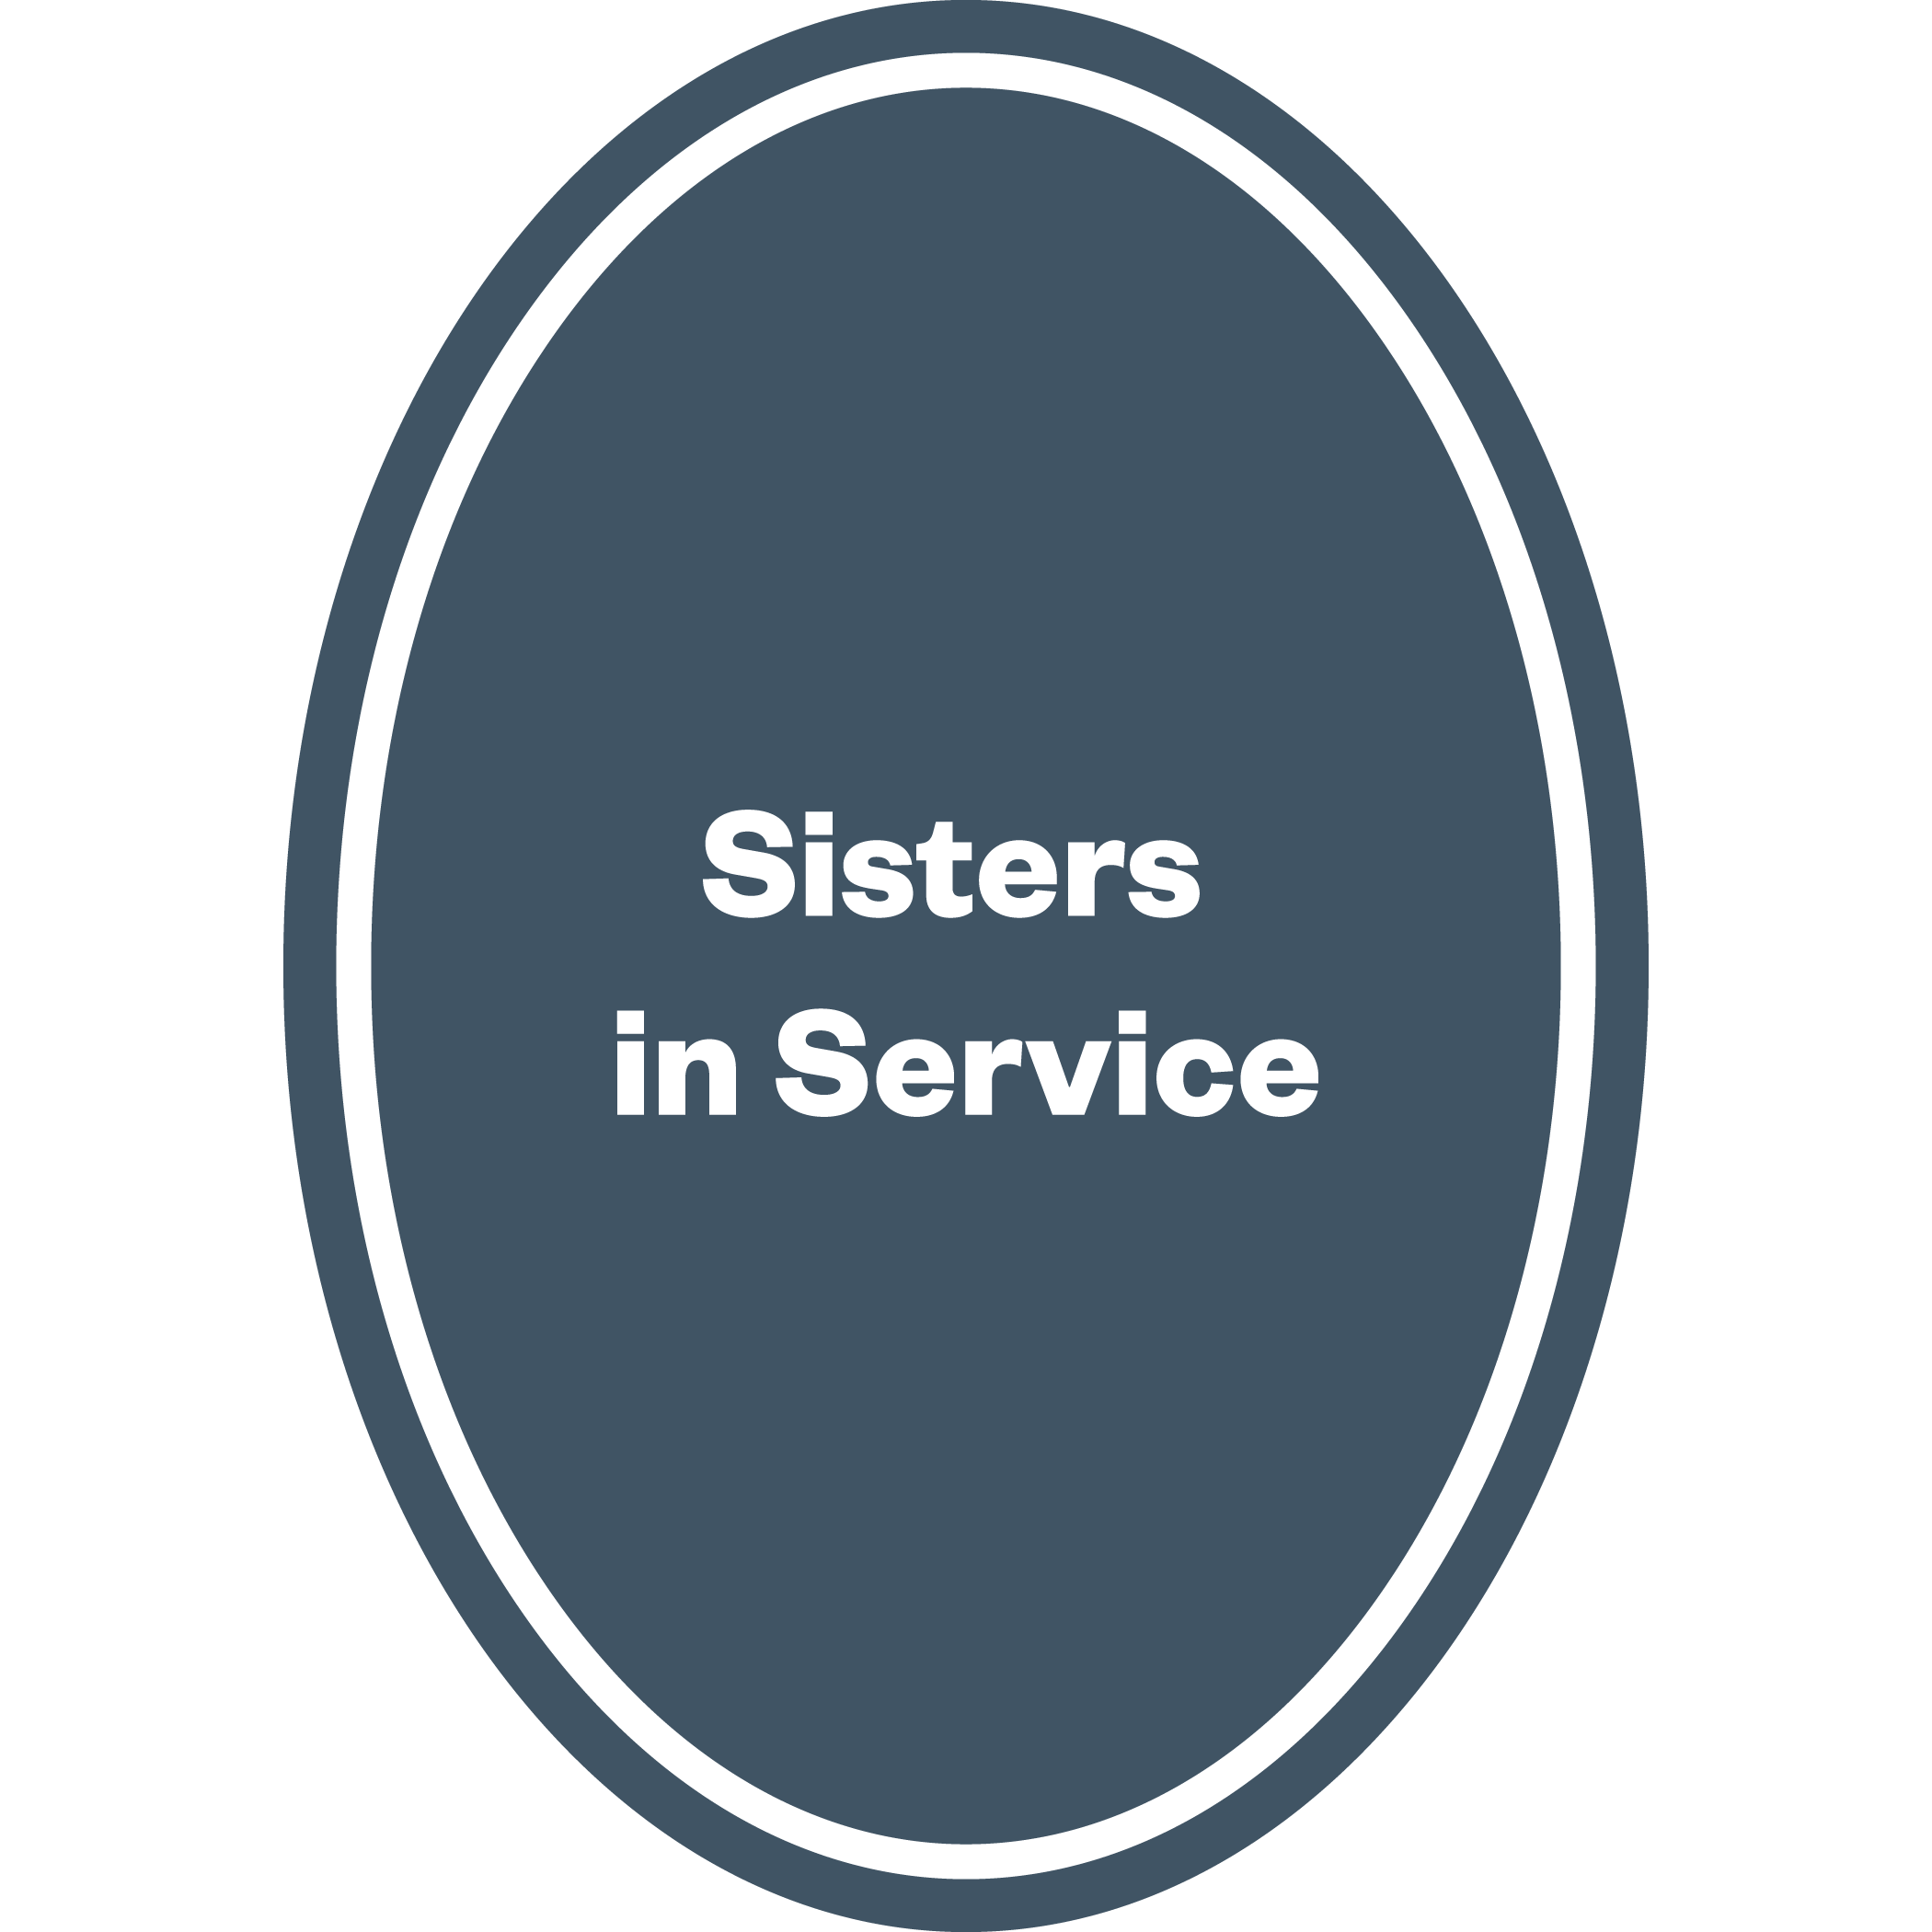 Sisters in Service